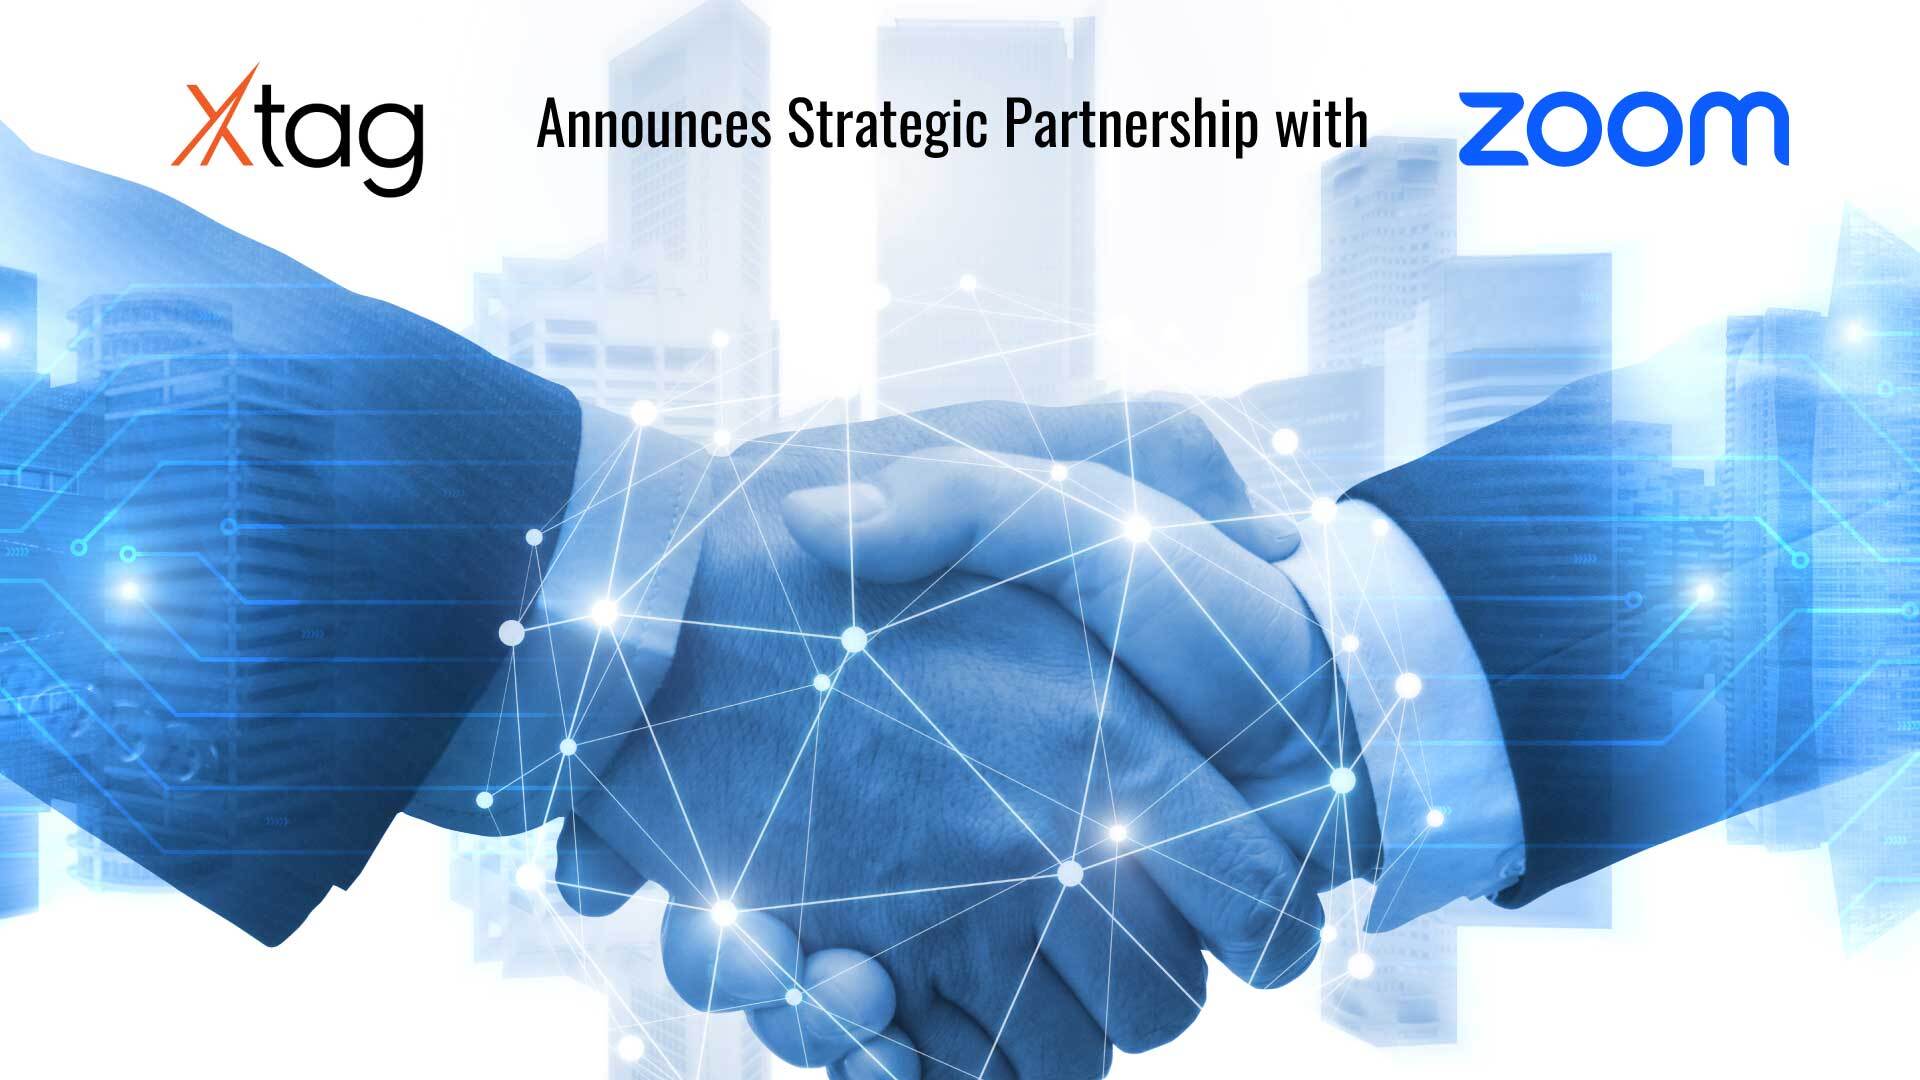 Xtag Announces Strategic Partnership with Zoom Events to Deliver Comprehensive Hybrid and In-Person Event Solutions